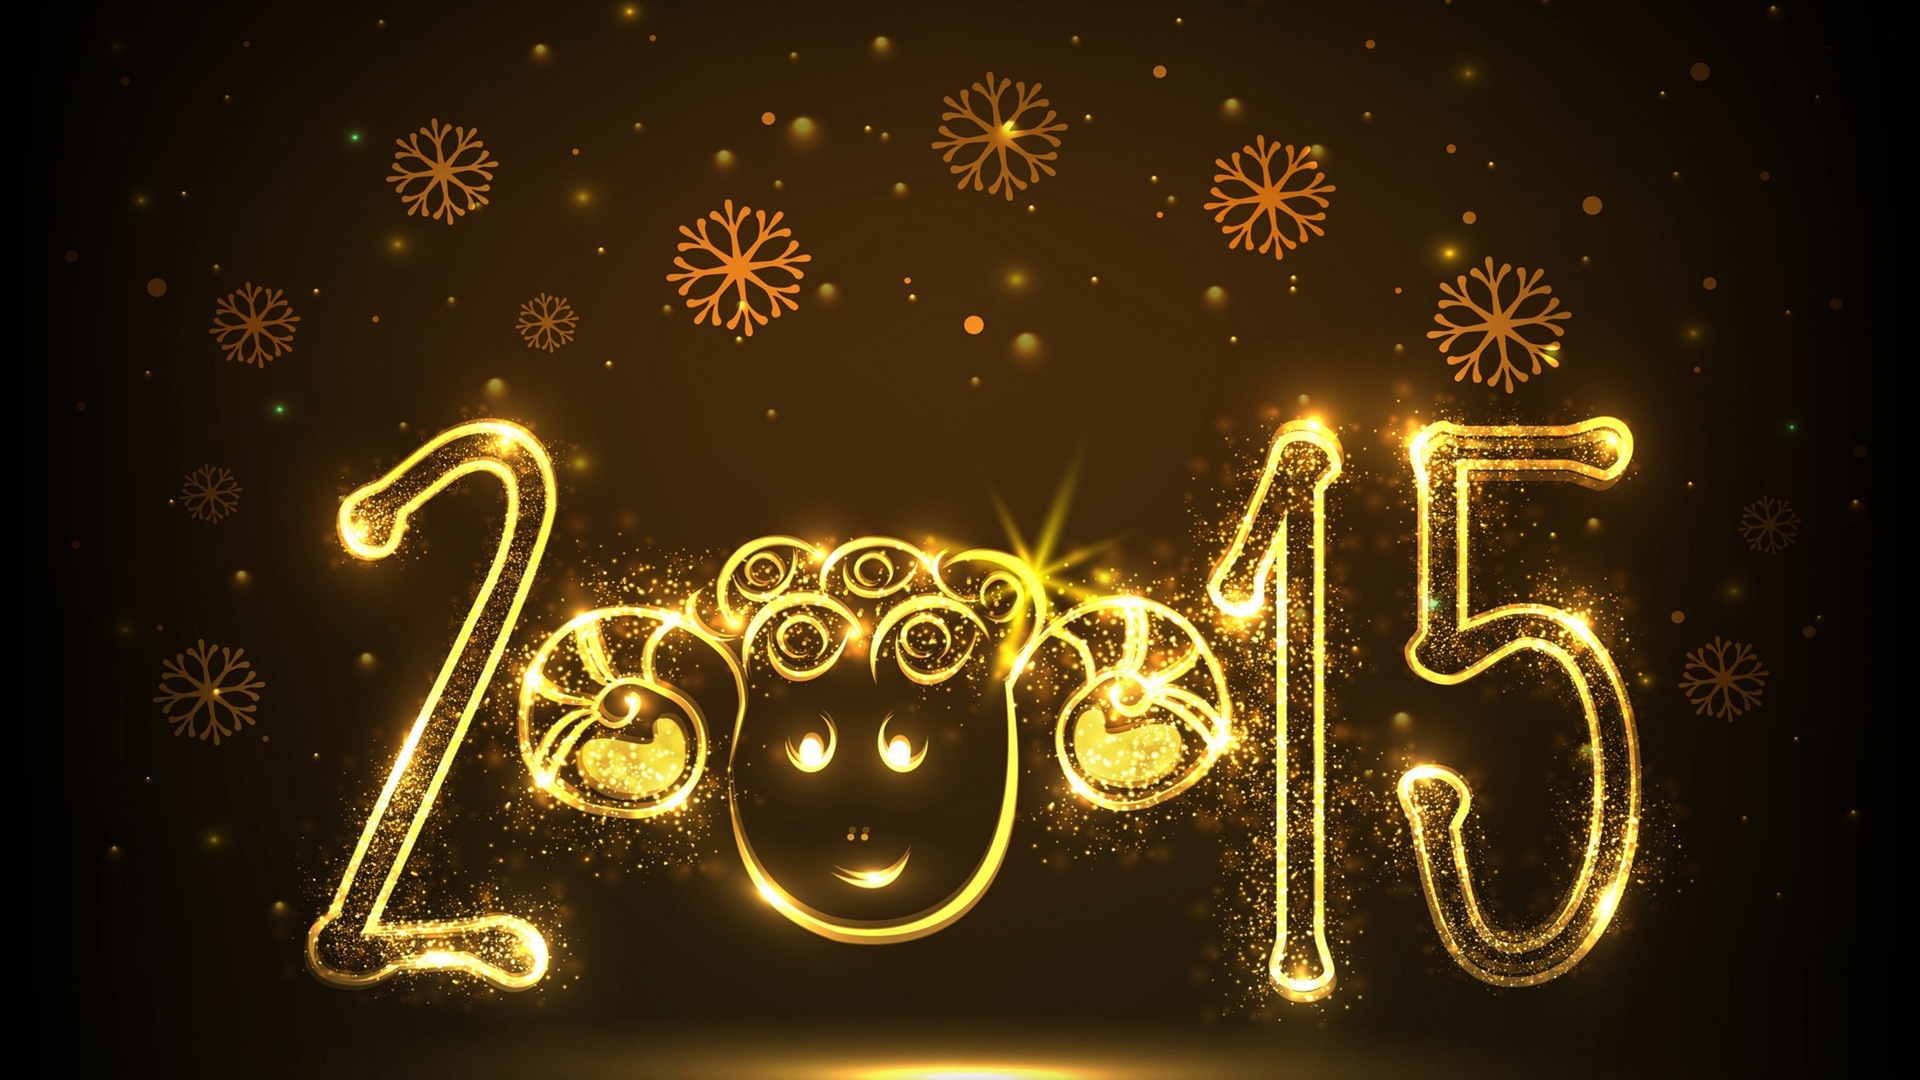 2015 New Year theme HD wallpapers (1) #19 - 1920x1080